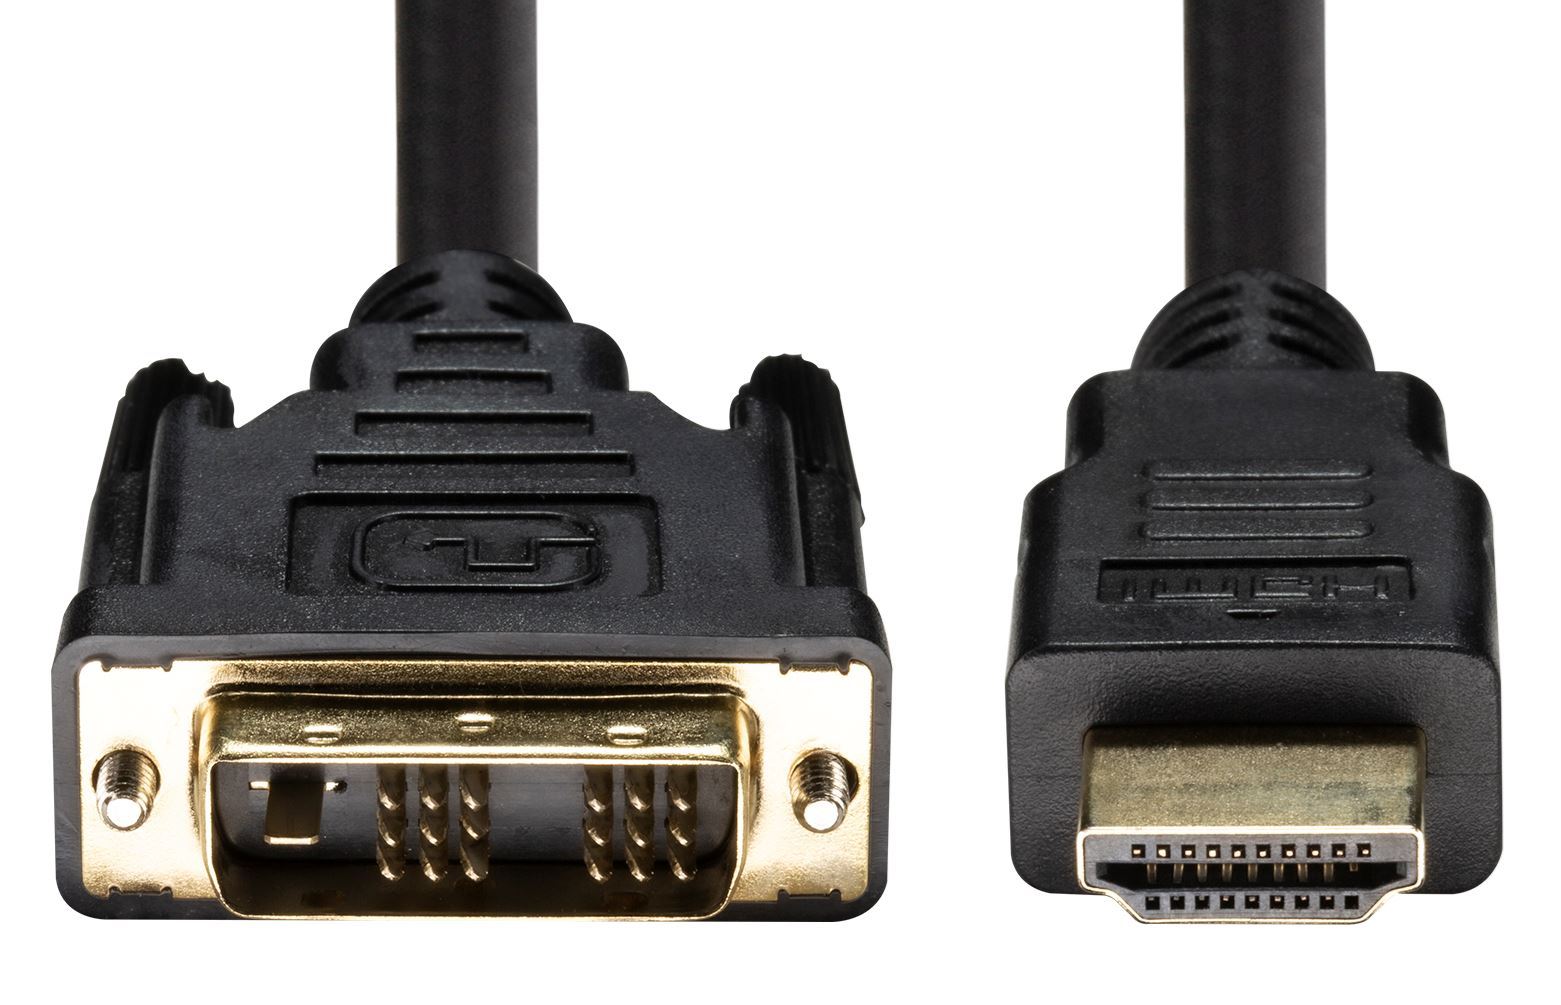 DYNAMIX_5m_HDMI_Male_to_DVI-D_Male_(18+1)_Cable._Single_link._Max_Res:_1080p_60Hz,_Bi-directional. 860